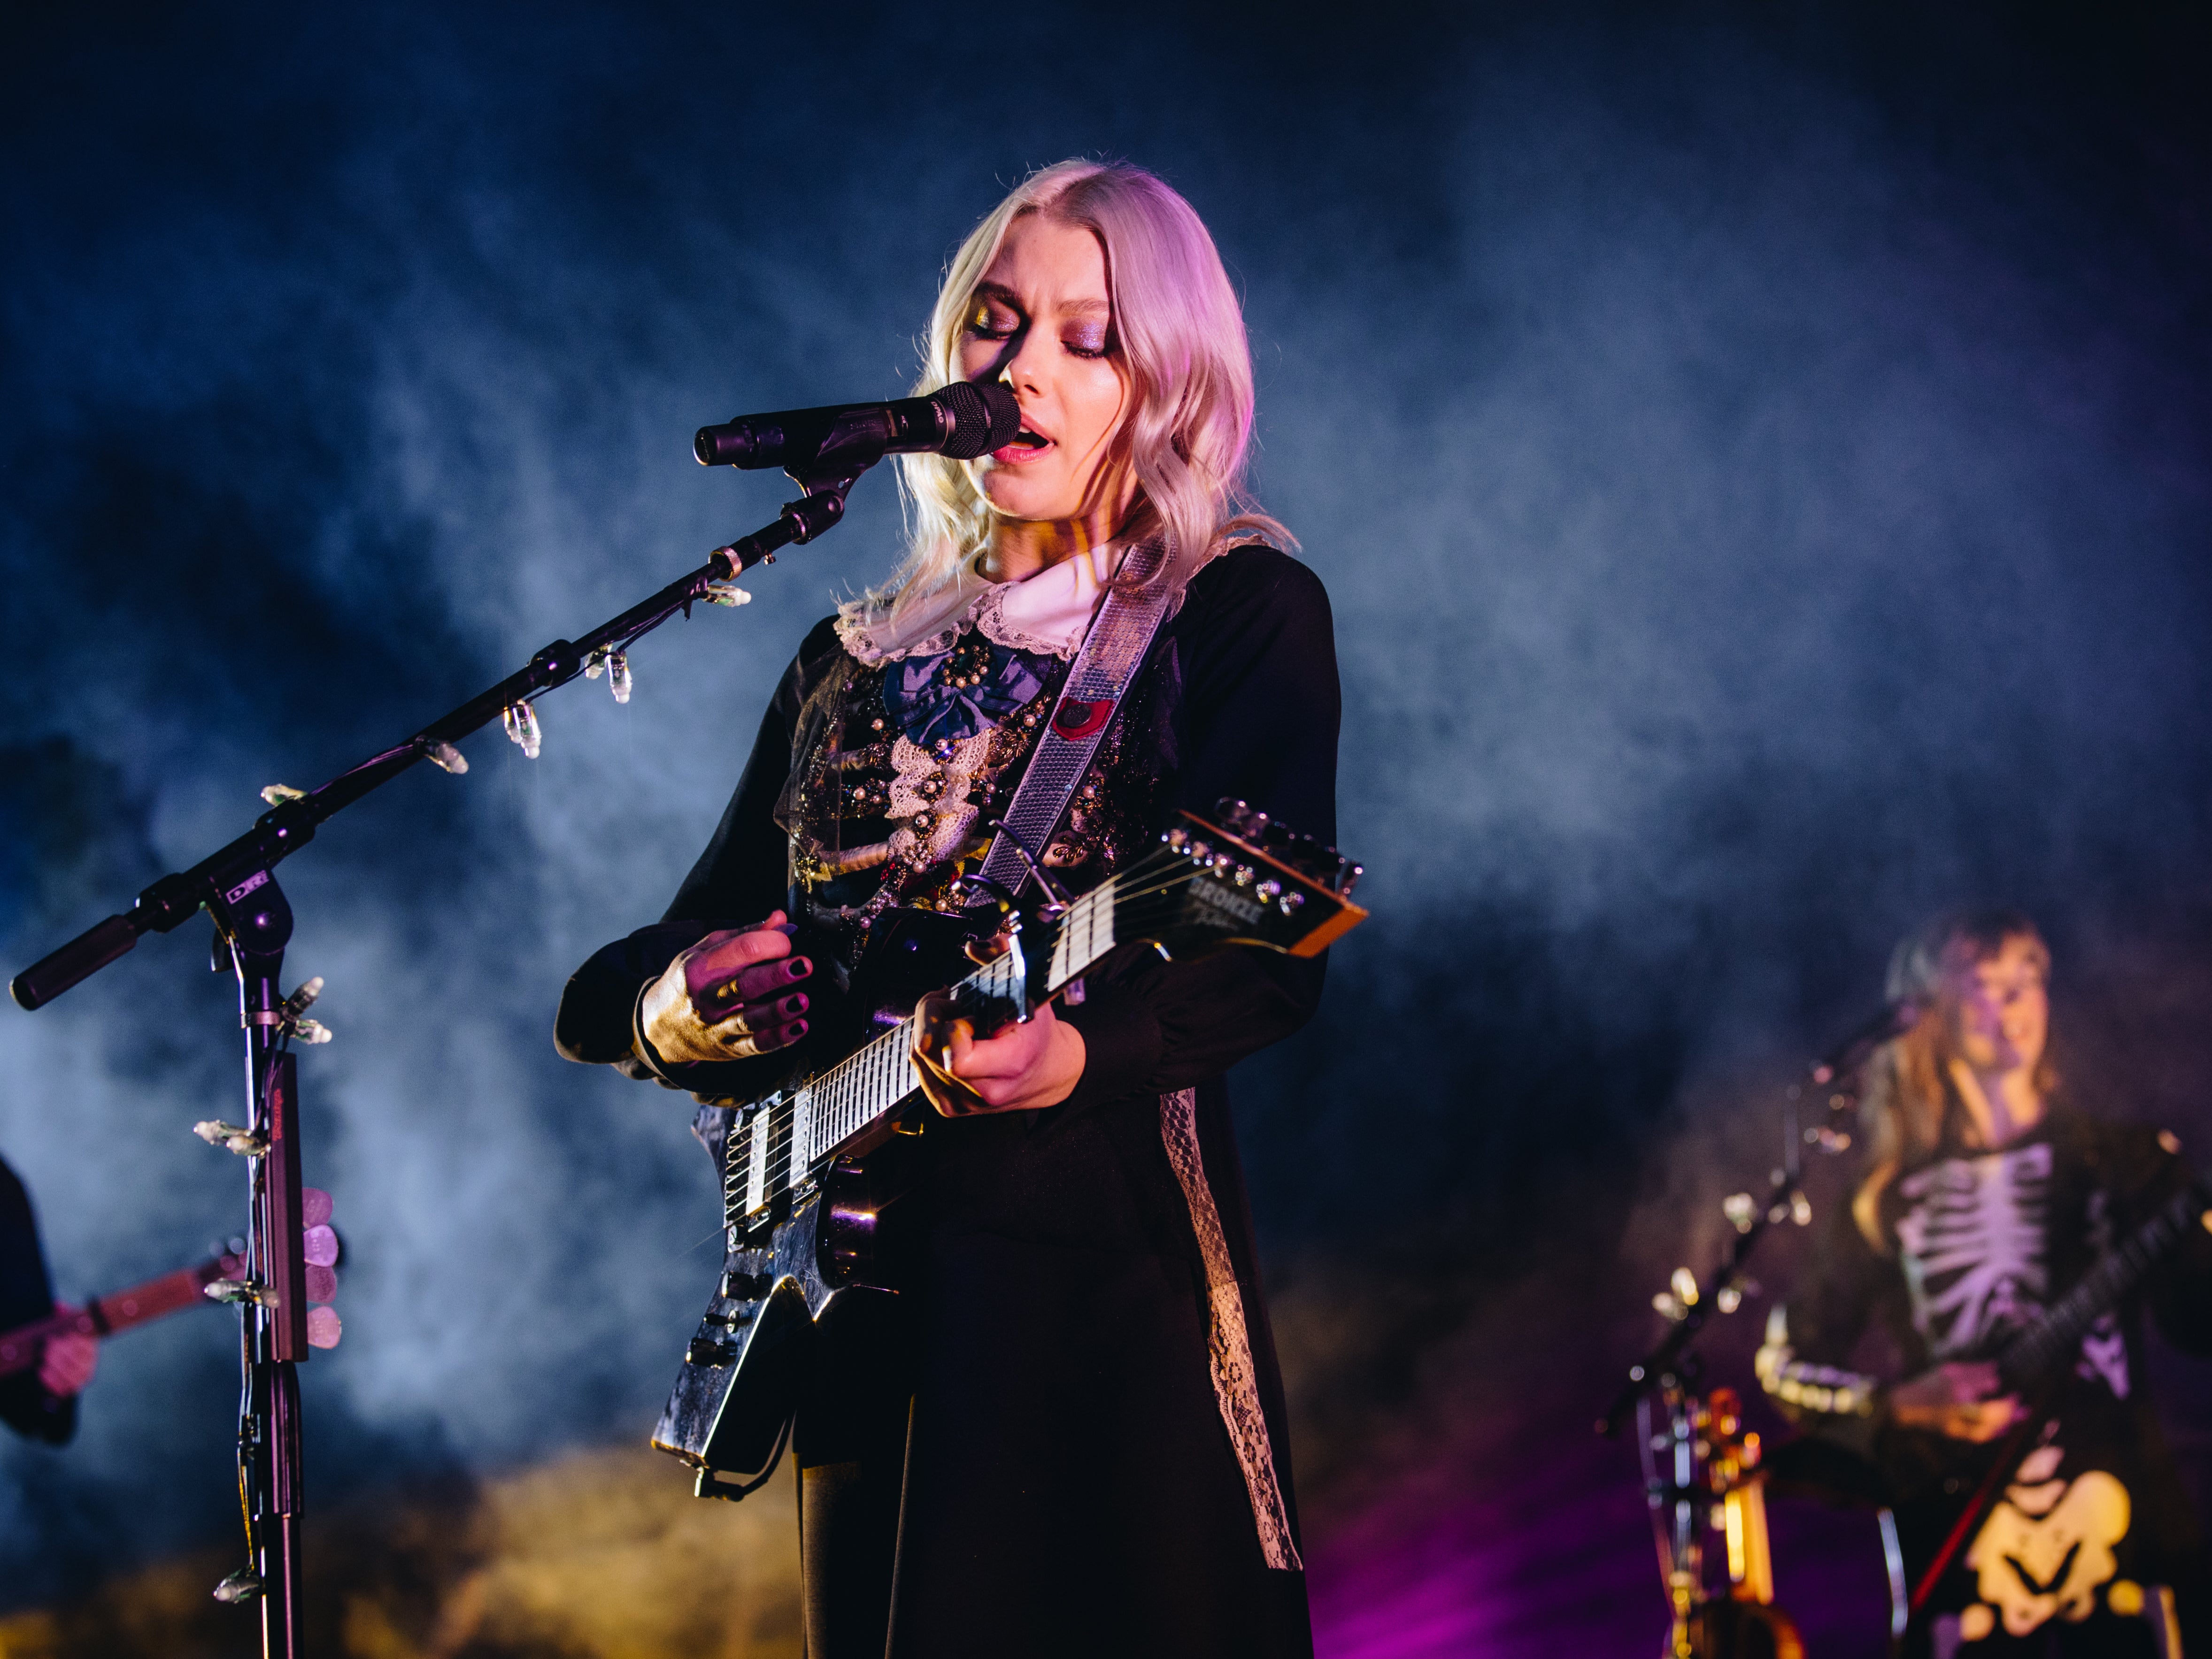 Phoebe Bridgers is playing Latitude this year, but she should be headlining